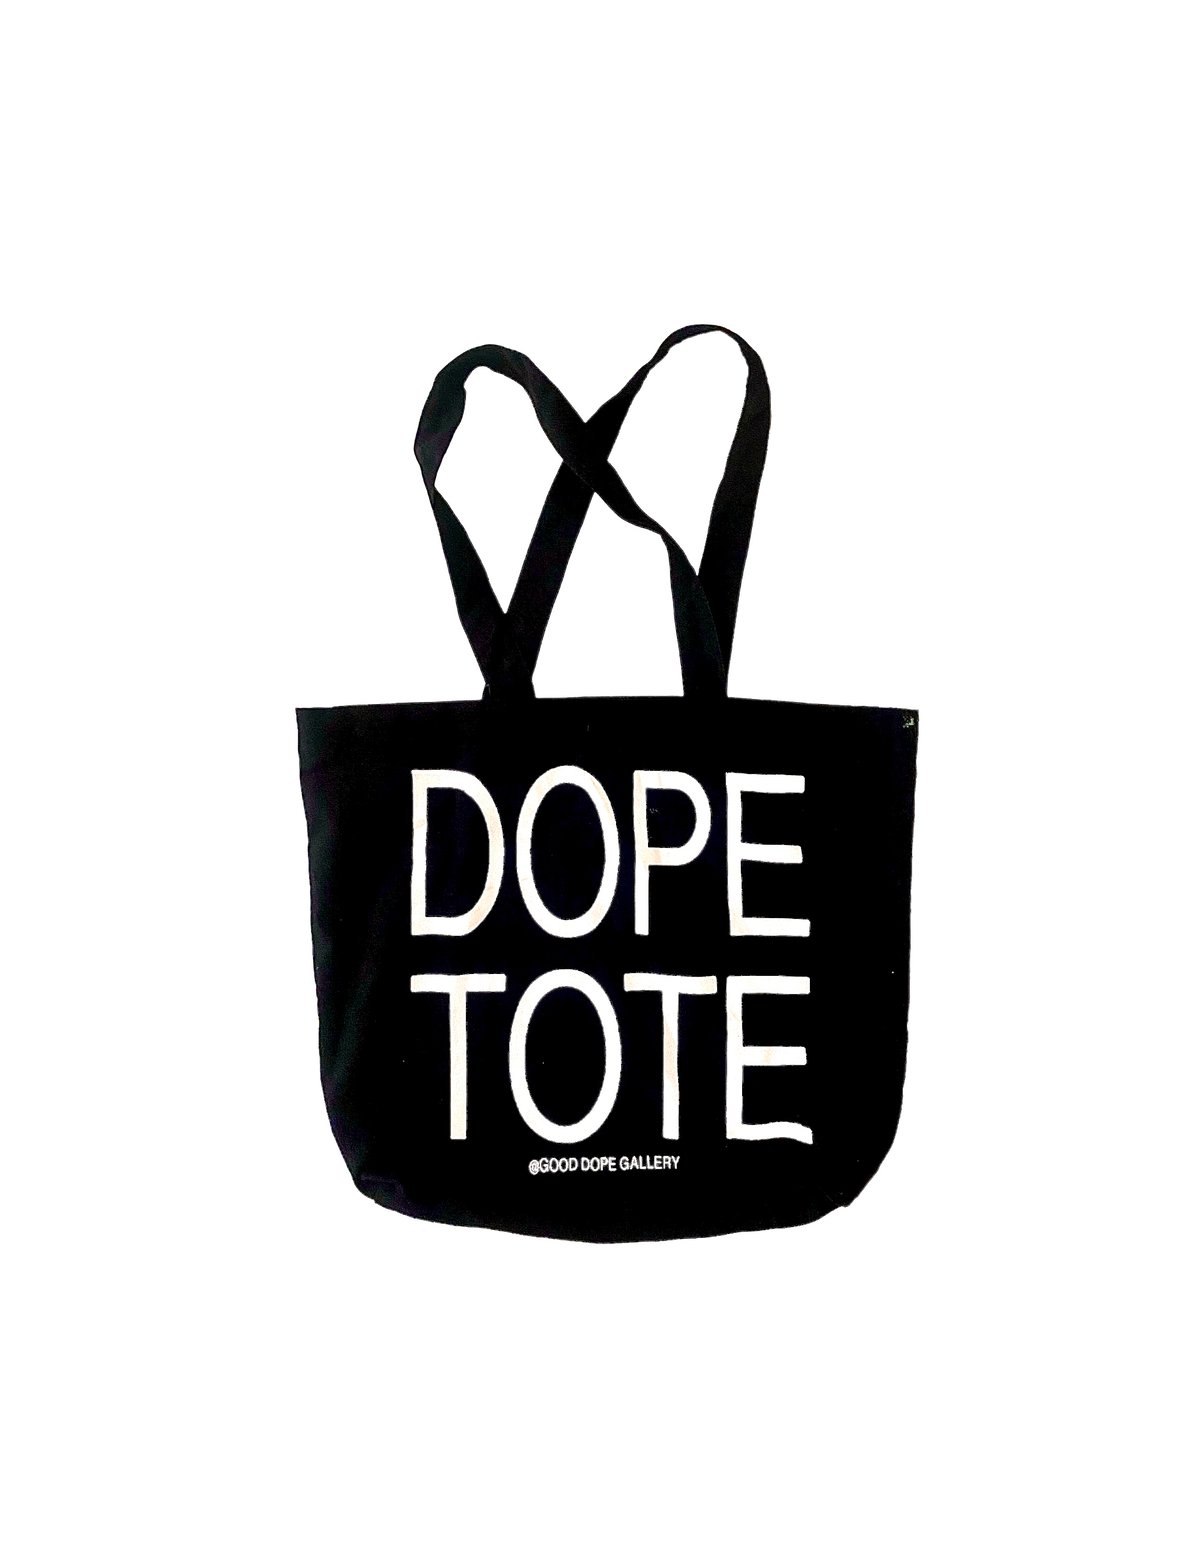 Dope Tote bags